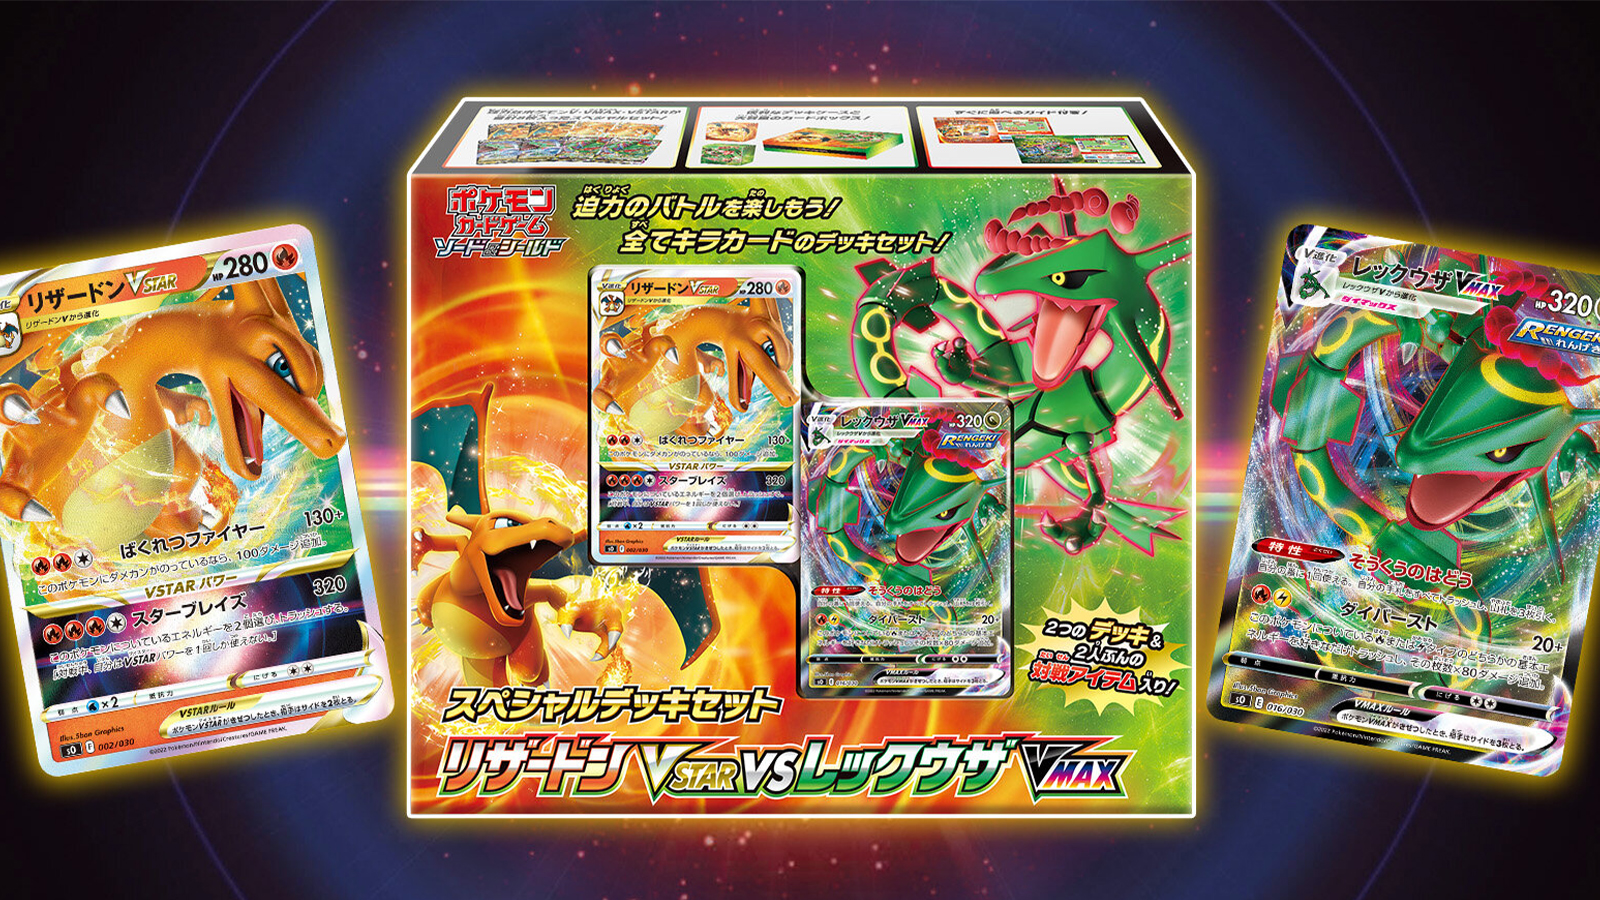 The Pokémon Company unveils Charizard and Rayquaza Special Deck